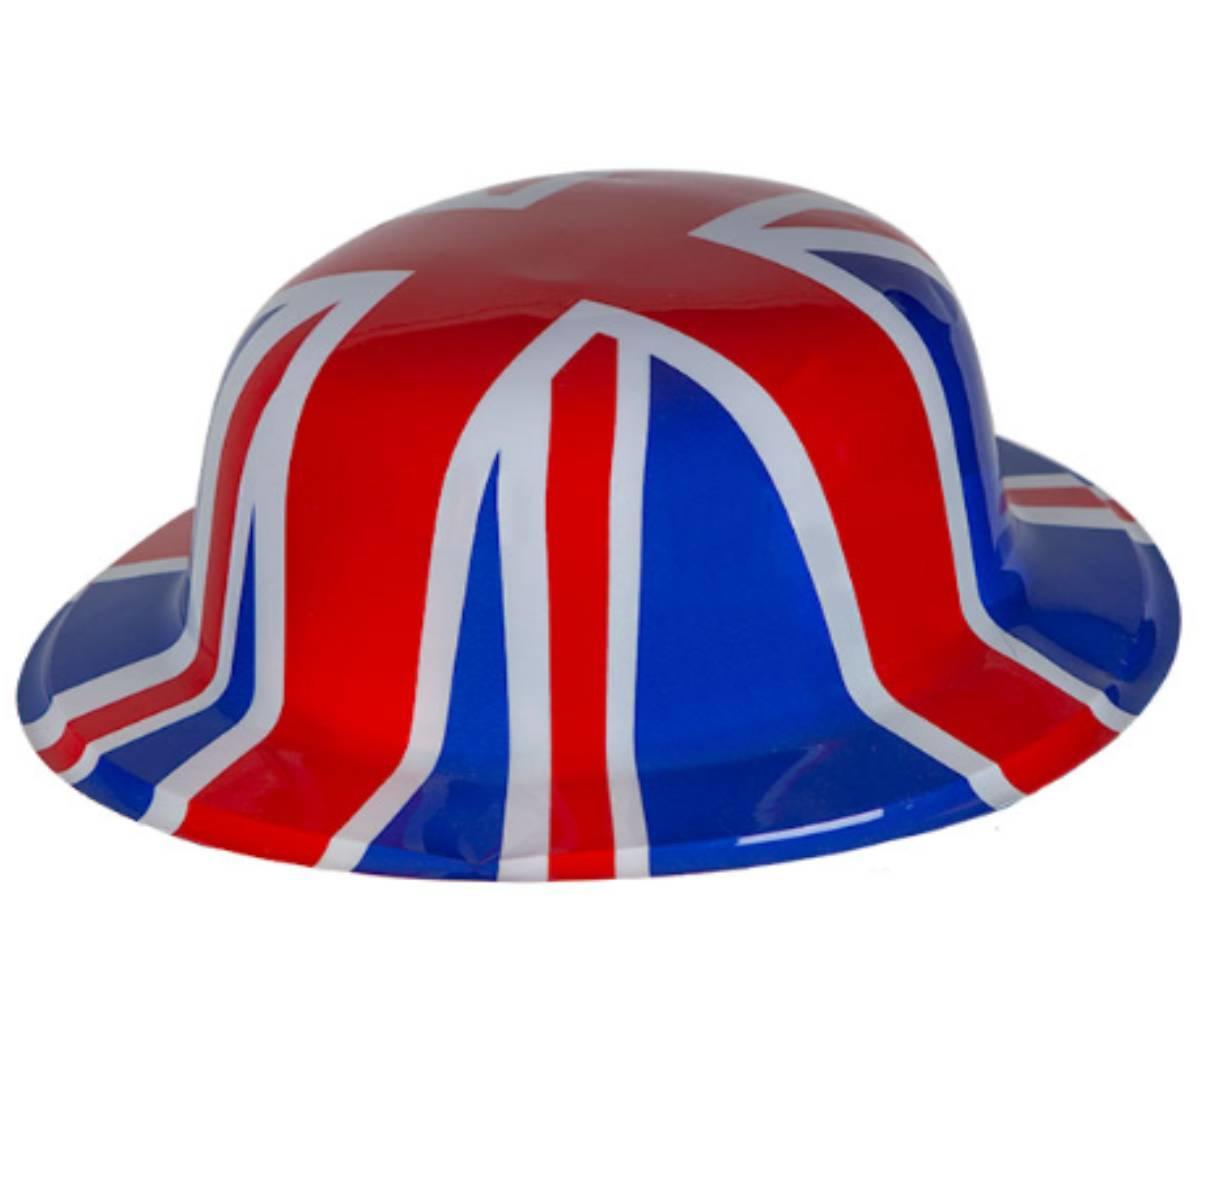 Adult Union Jack Flag Party Bowler Hat by Creative Collection D8280 available here at Karnival Costumes online party shop